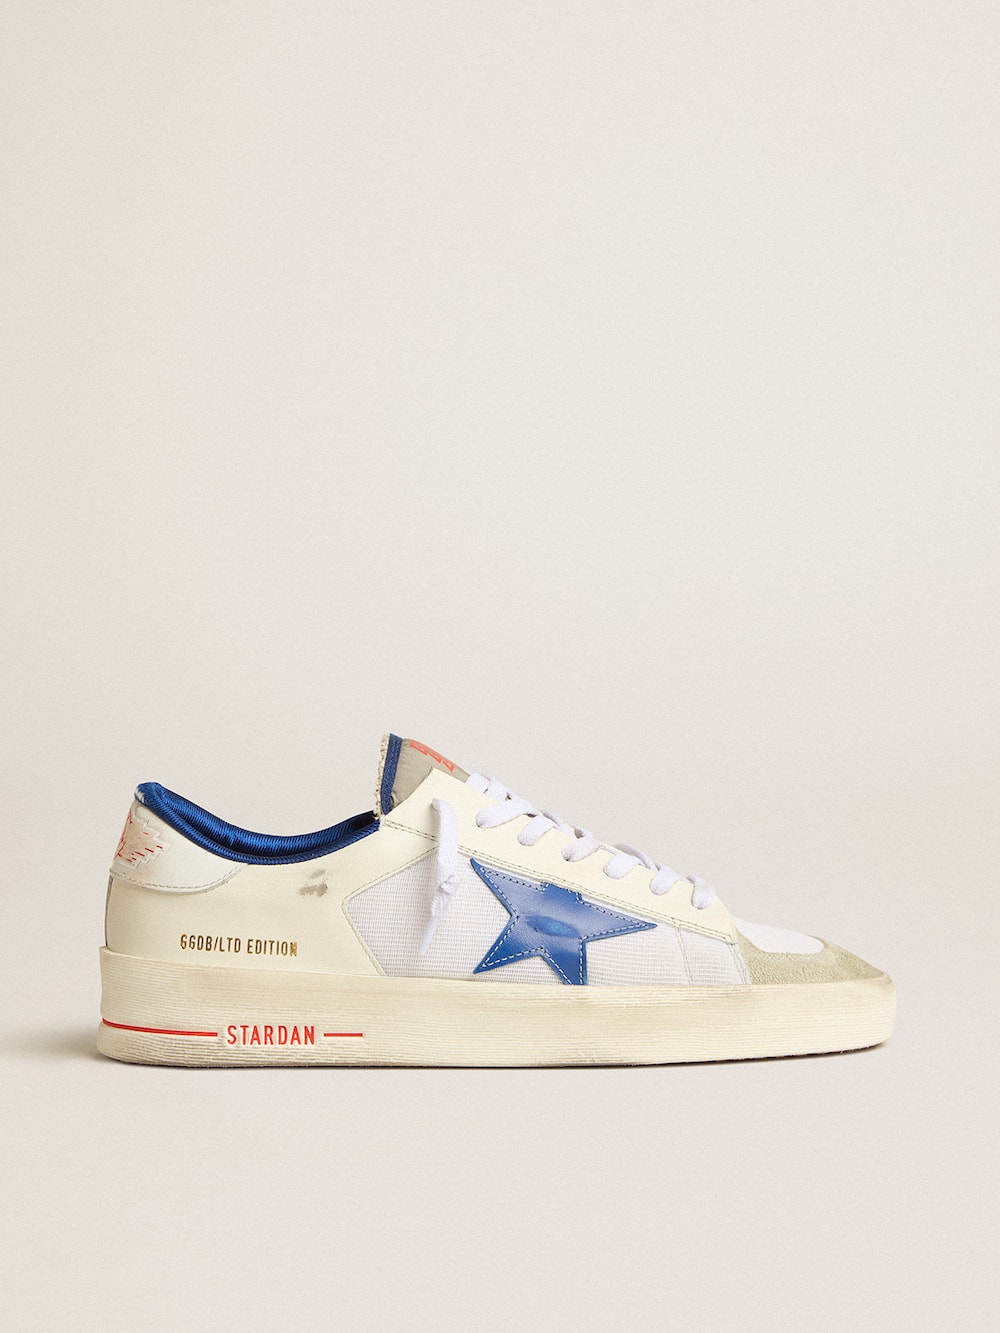 Golden Goose - Stardan LTD in white mesh and leather with blue star and white heel tab in 